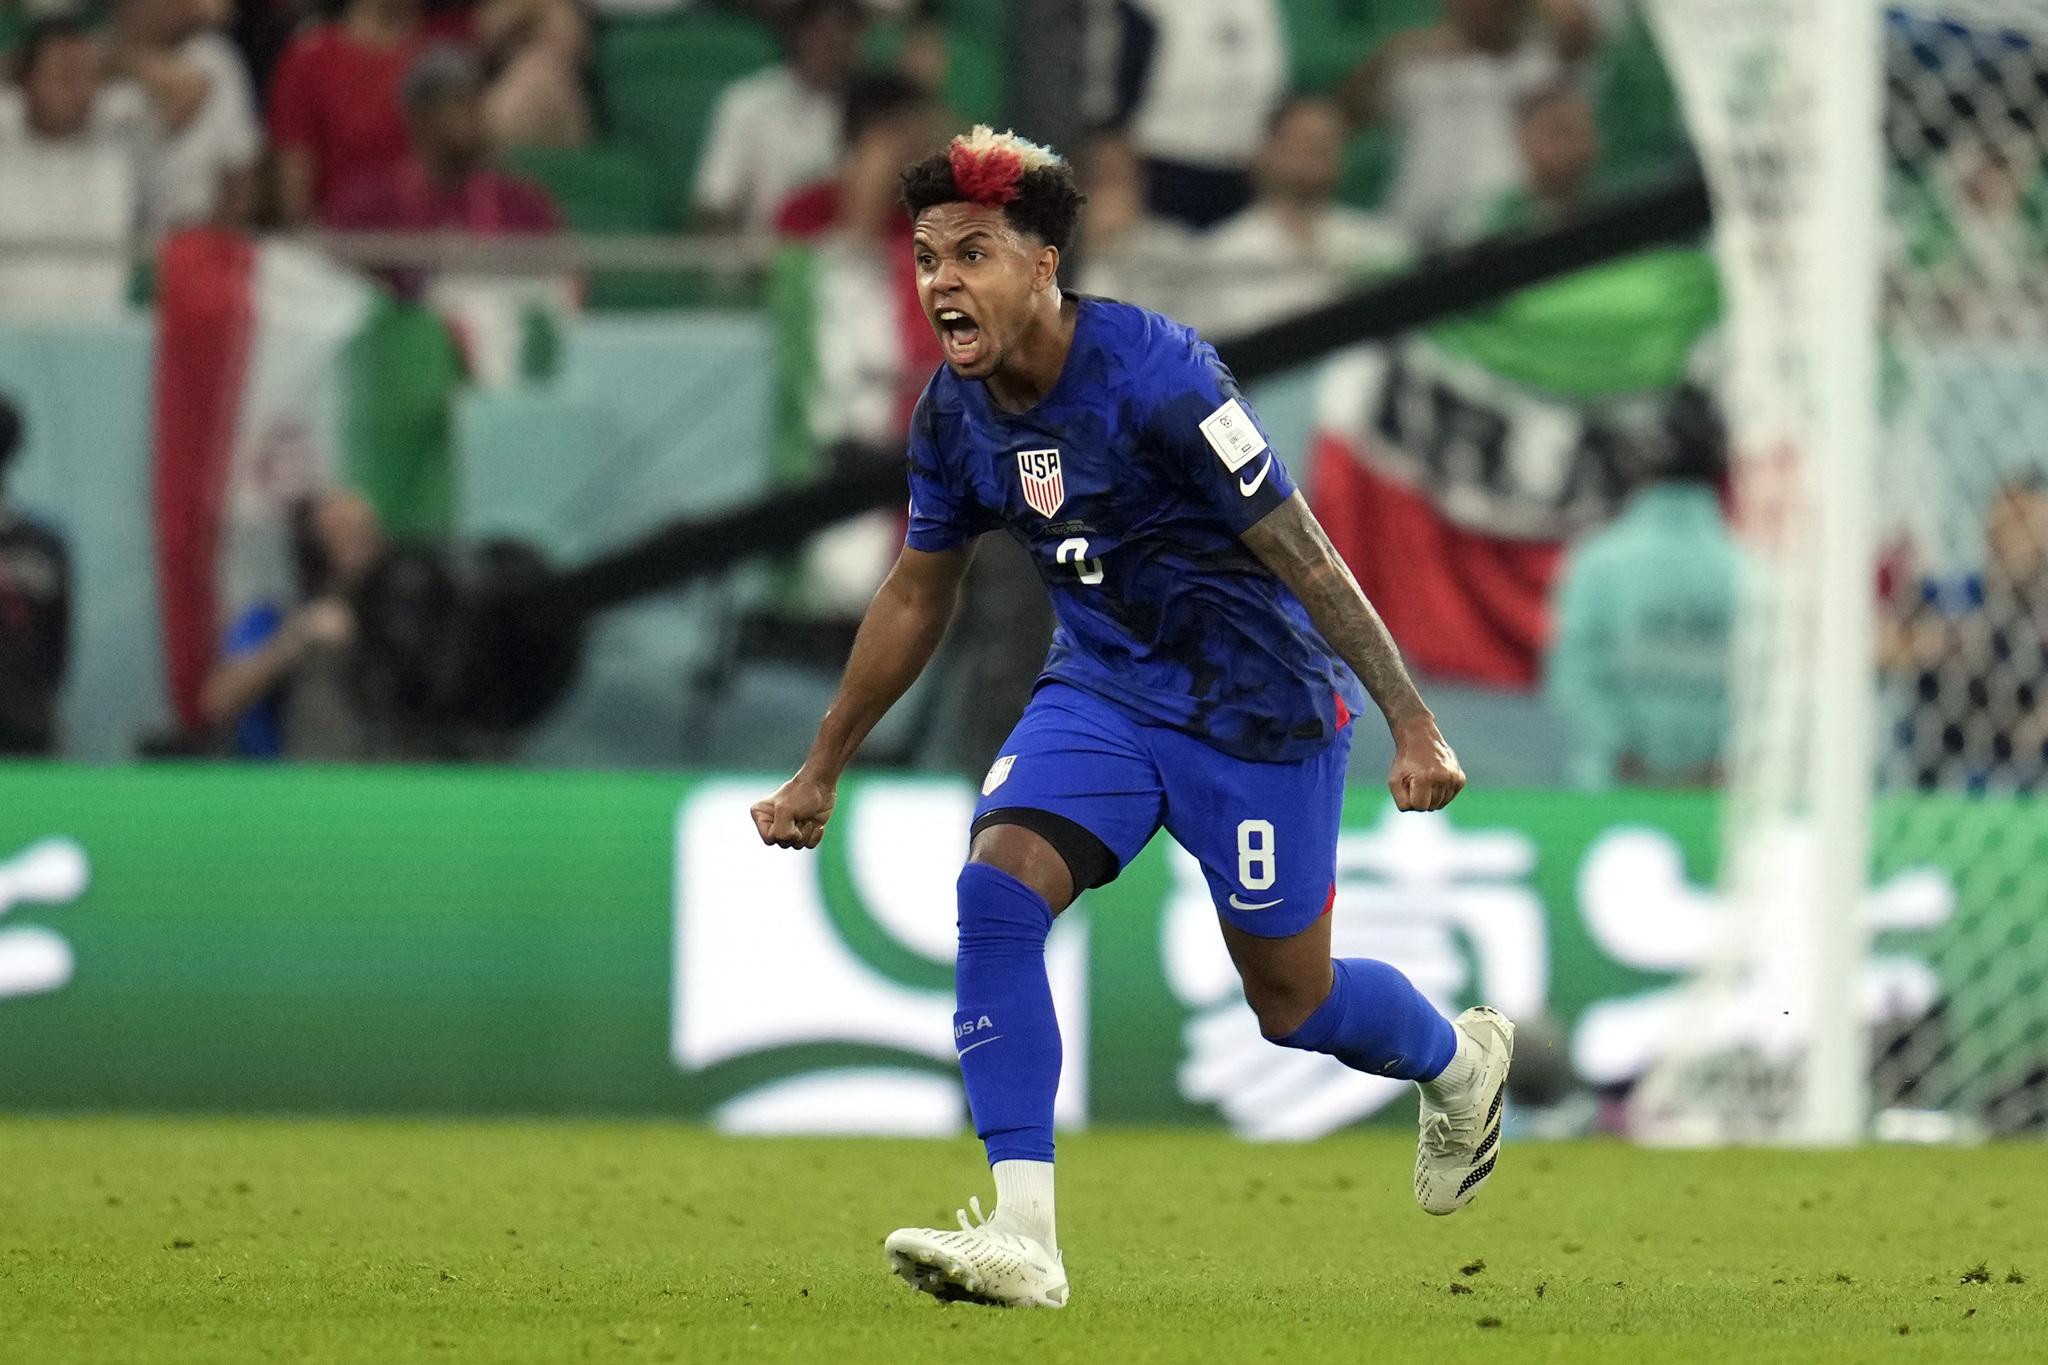 United States' Weston  lt;HIT gt;McKennie lt;/HIT gt; (8) celebrates after teammate Christian Pulisic scoring a goal during the World Cup group B soccer match between Iran and the United States at the Al Thumama Stadium in Doha, Qatar, Tuesday, Nov. 29, 2022. (AP Photo/Ashley Landis)